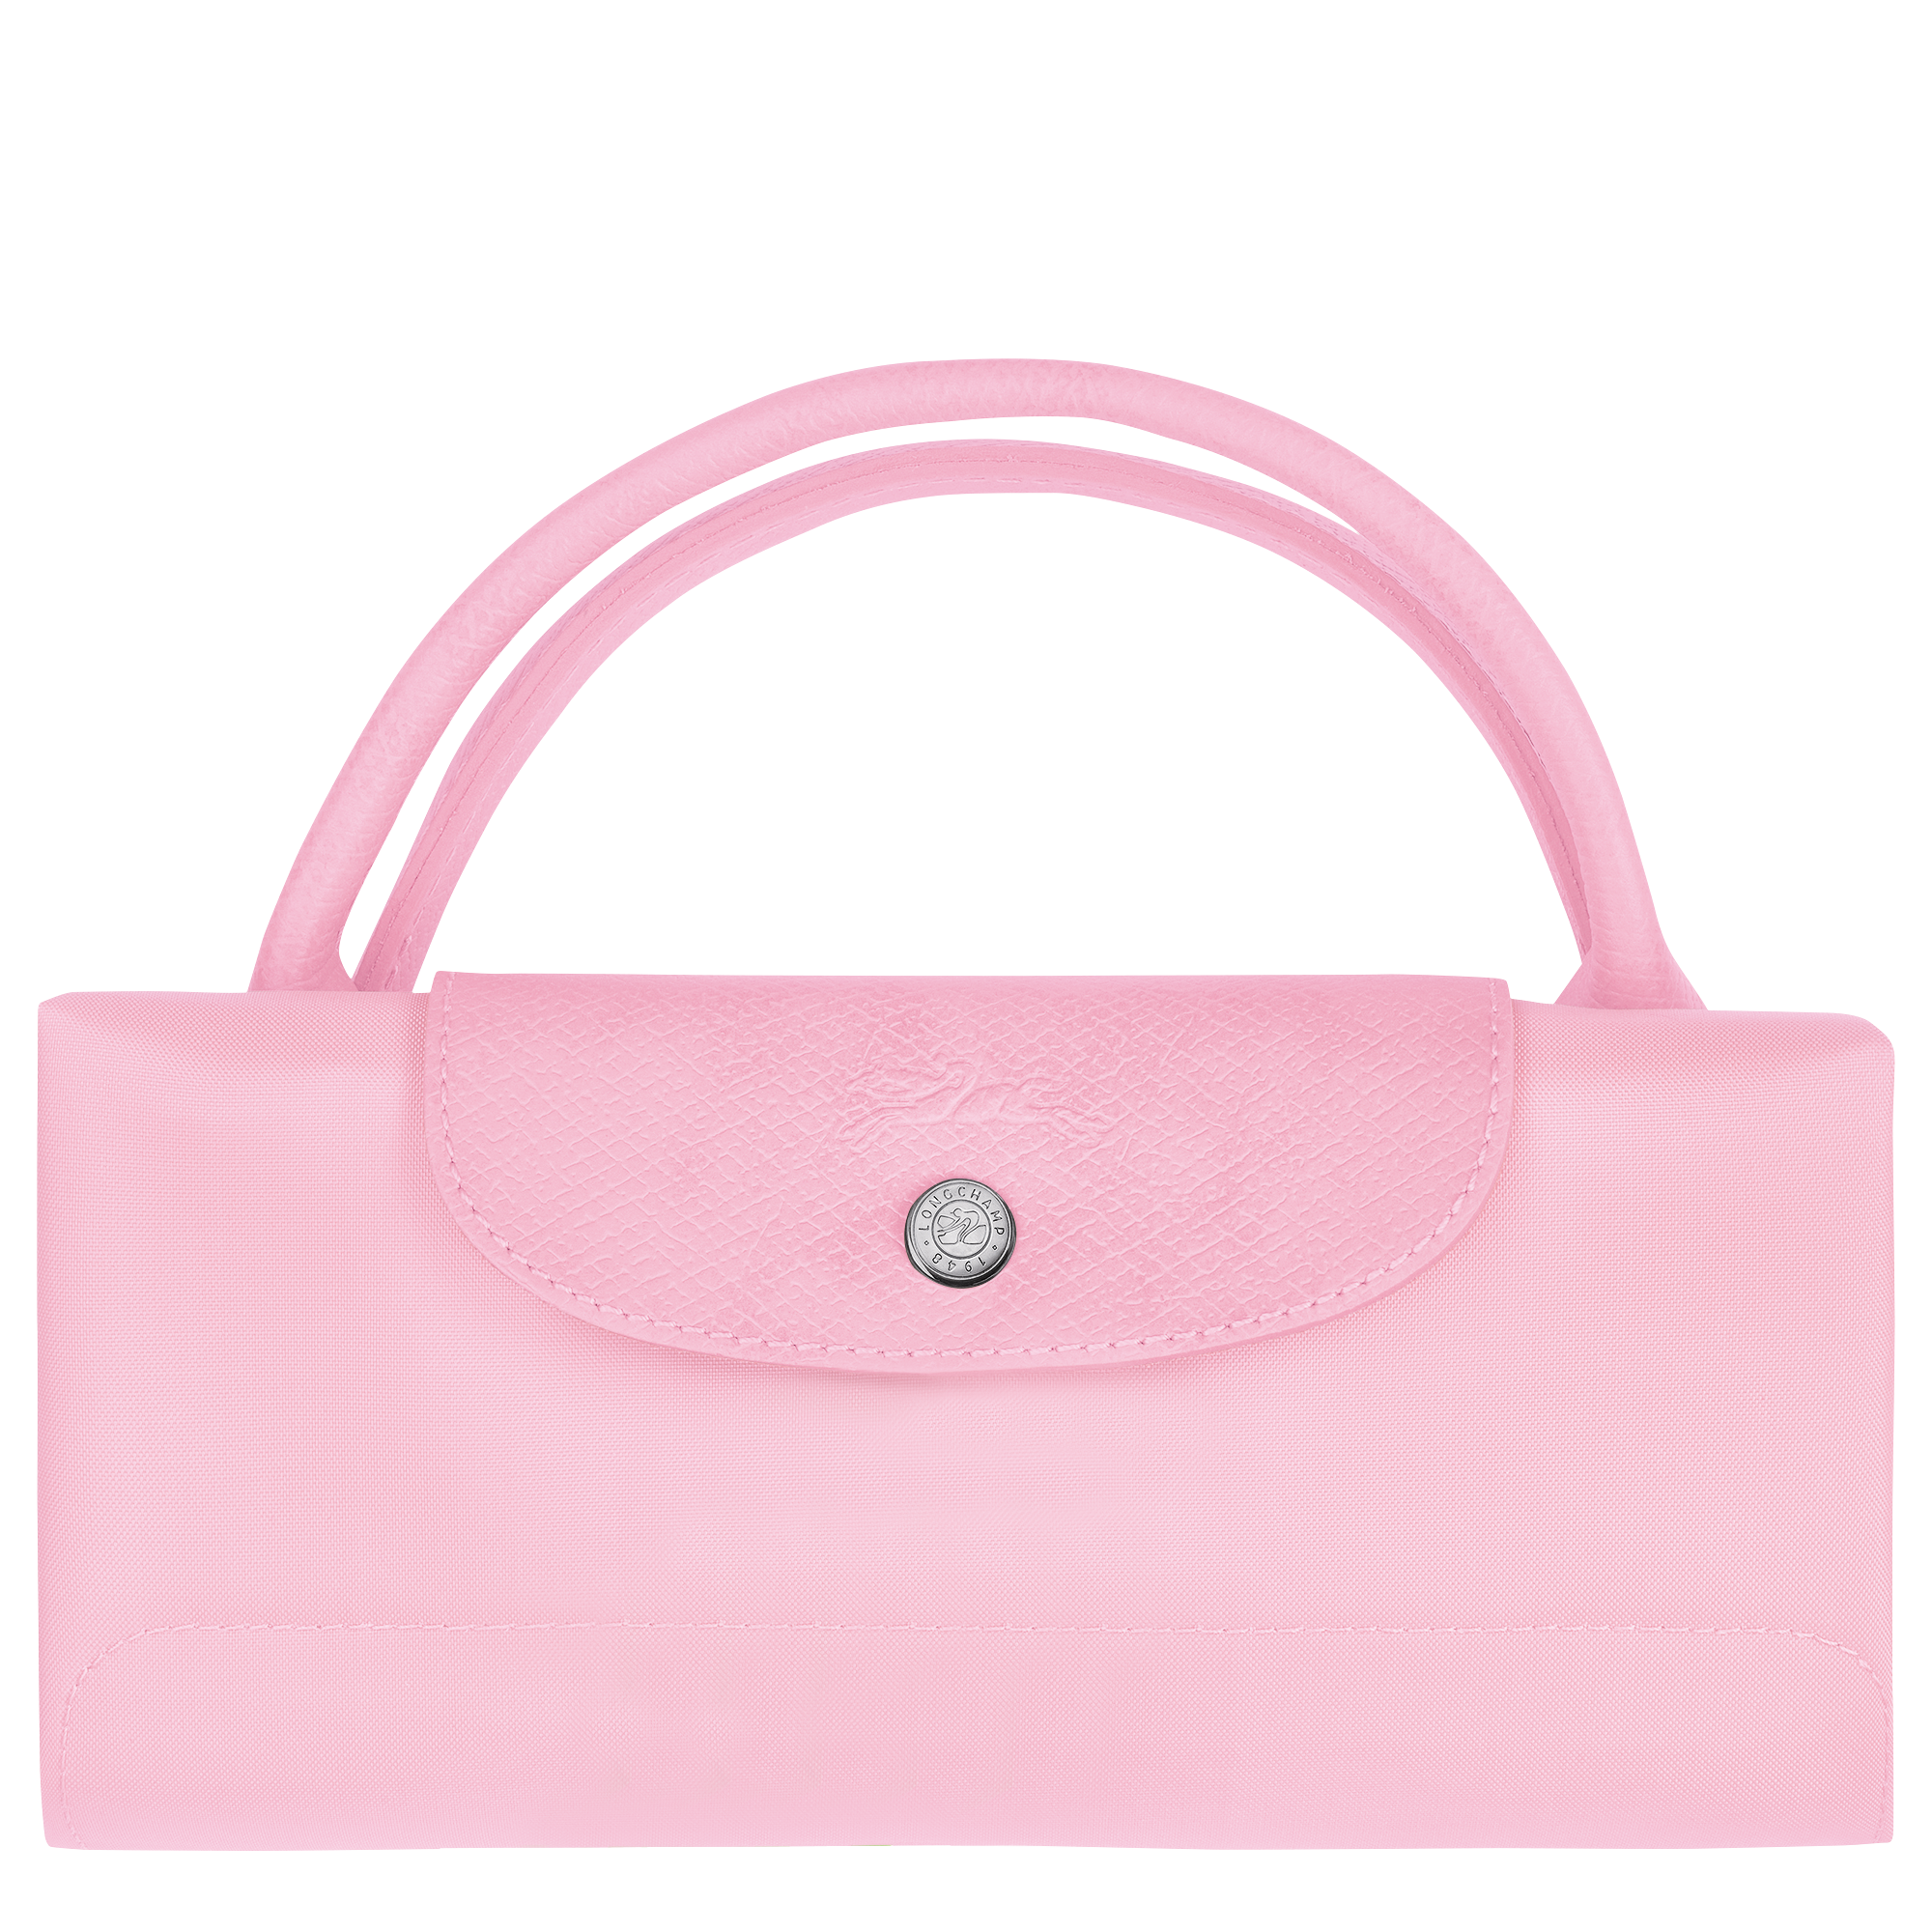 Le Pliage Green S Briefcase Pink - Recycled canvas (L2182919P75